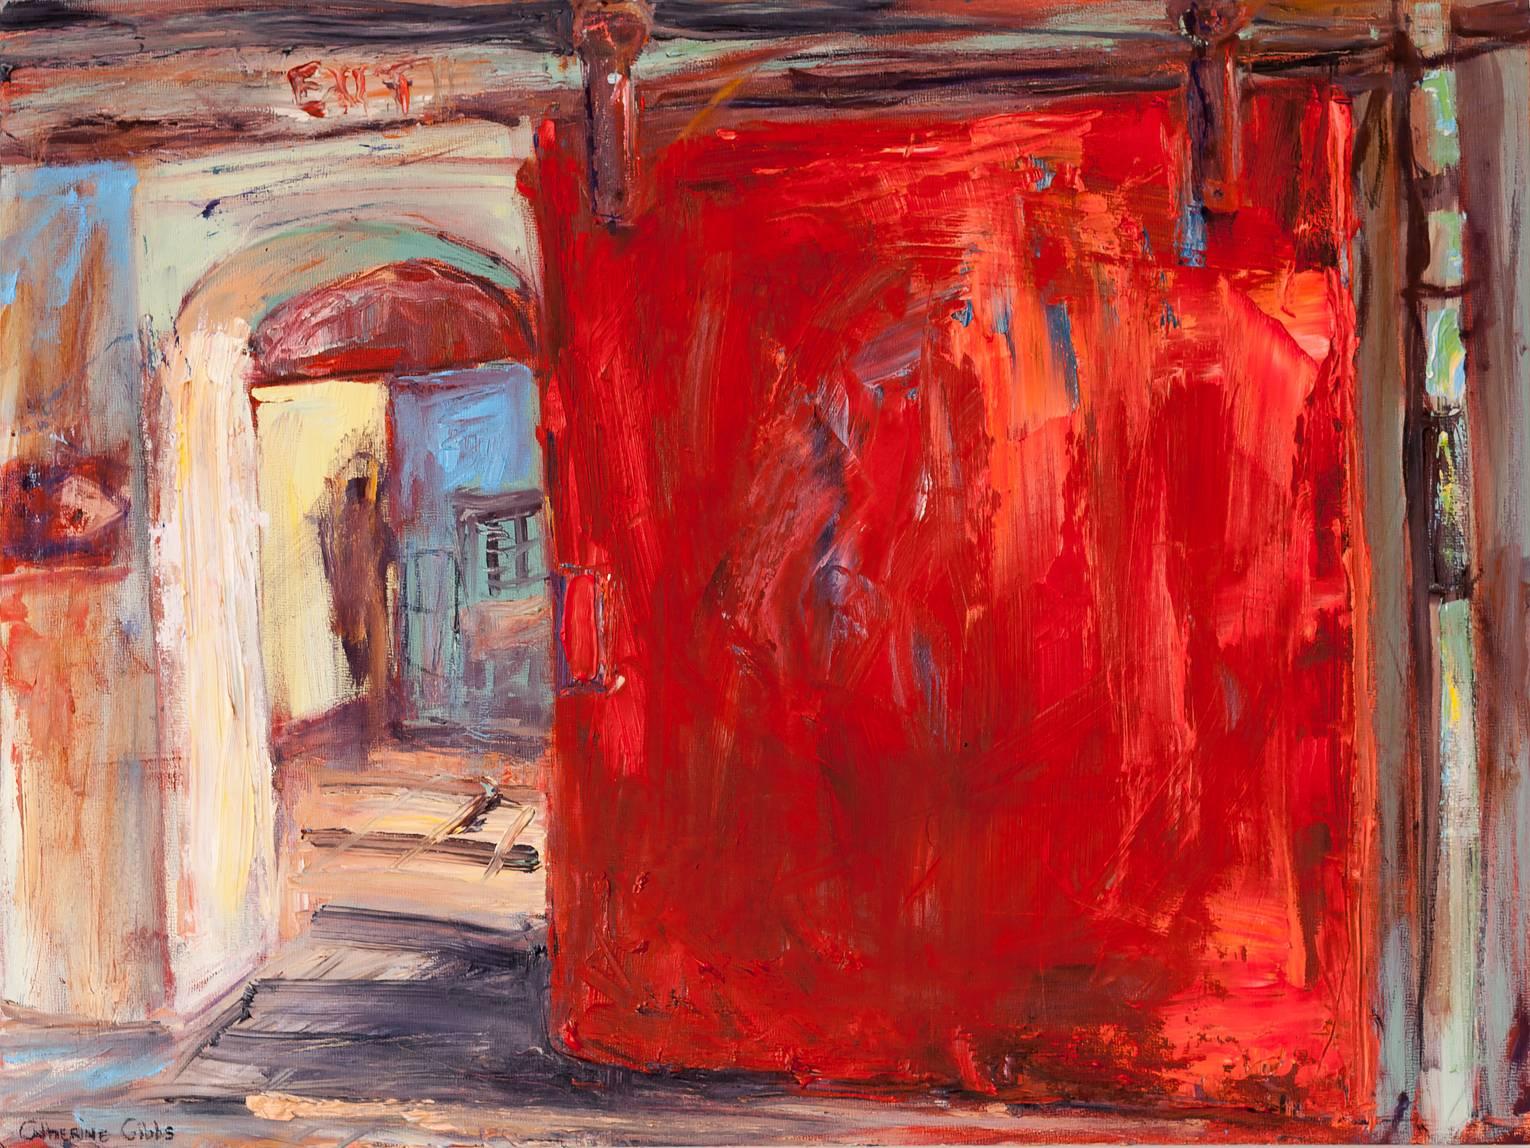 Catherine Picard-Gibbs Interior Painting - "The Fire Door", expressionist, interior, factory, red, blue, oil painting